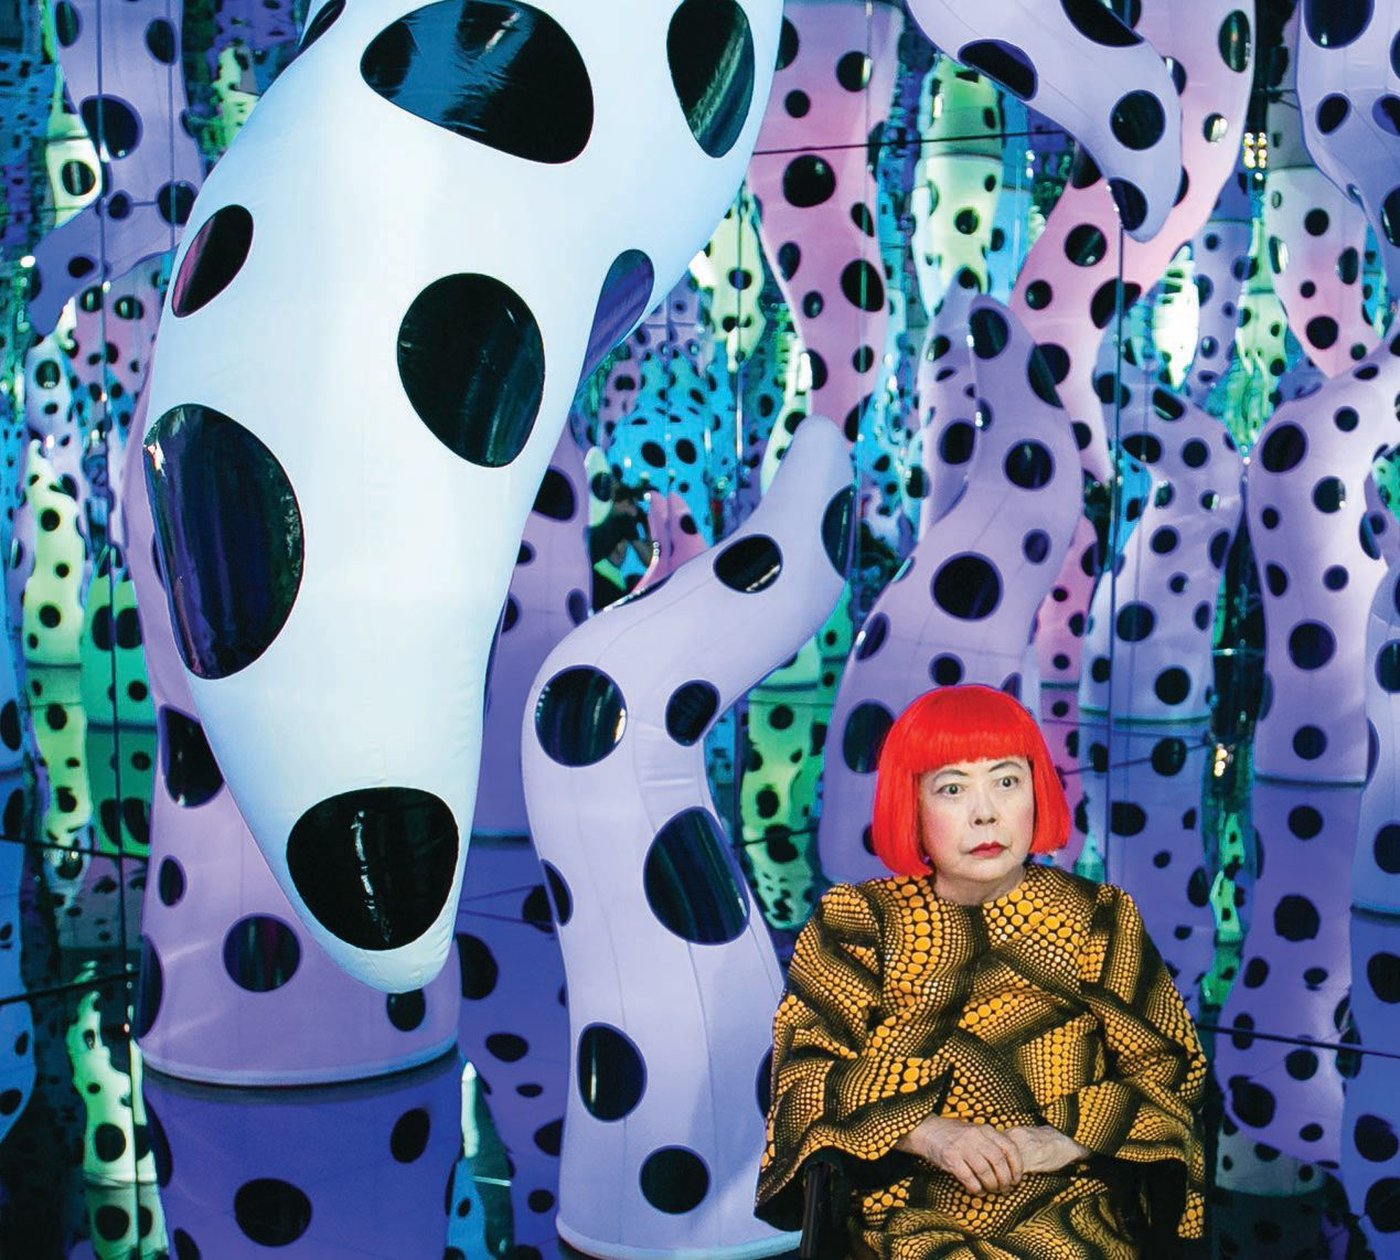 Japanese artist Yayoi Kusama’s “LOVE IS CALLING” is now on view at the Institute of Contemporary Art/Boston PHOTO: COURTESY OF INSTITUTE OF CONTEMPORARY ART/BOSTON